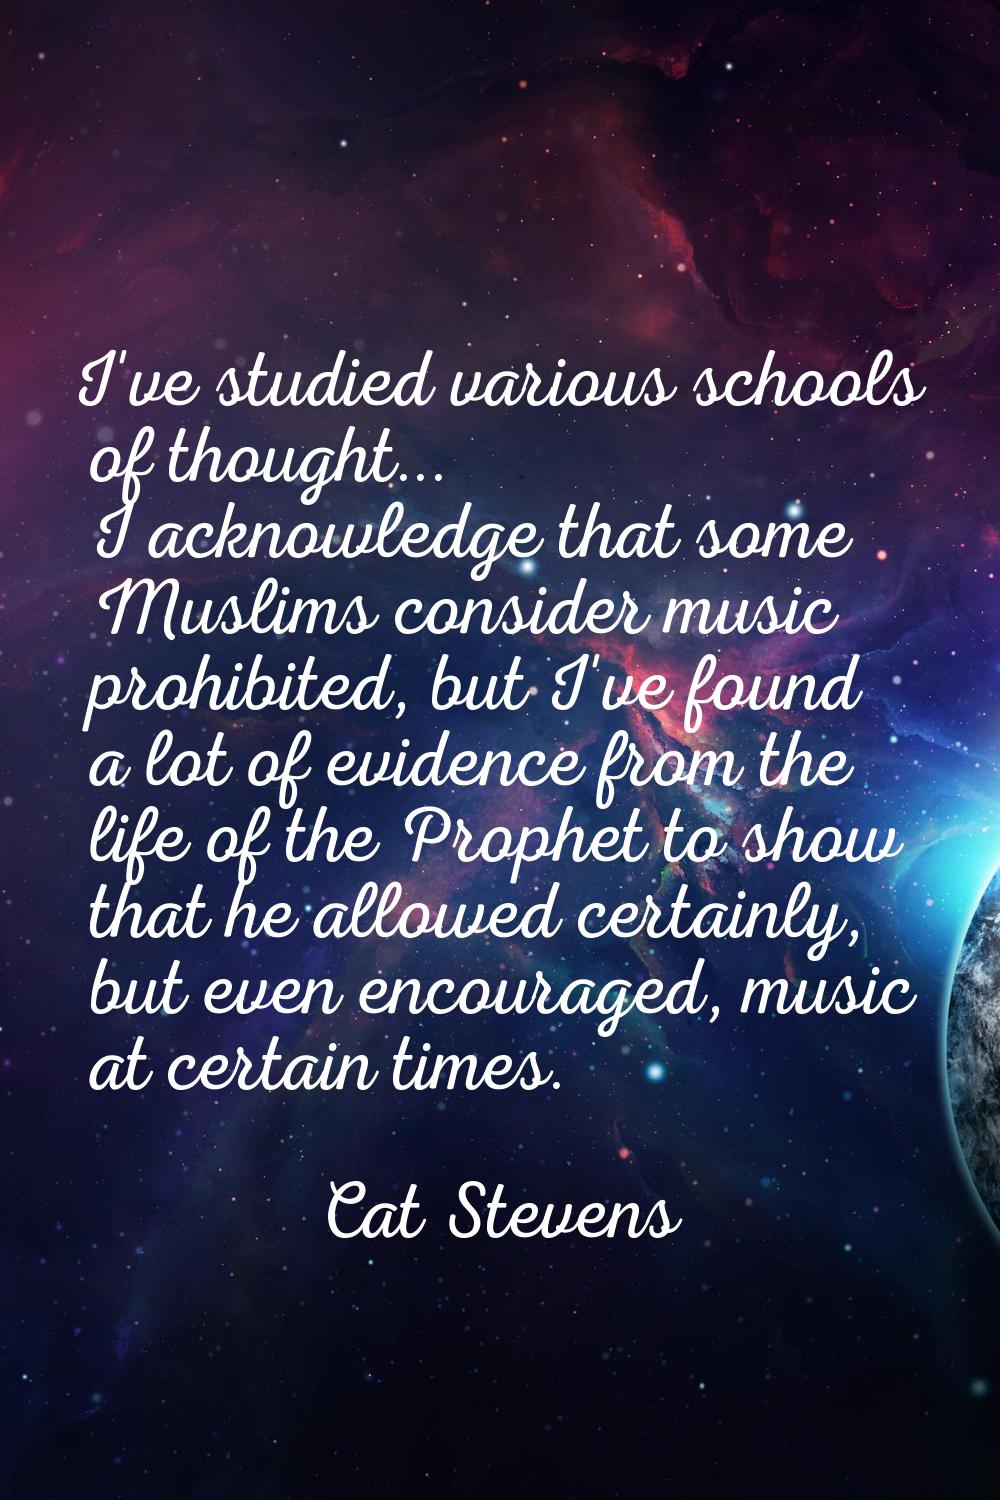 I've studied various schools of thought... I acknowledge that some Muslims consider music prohibite